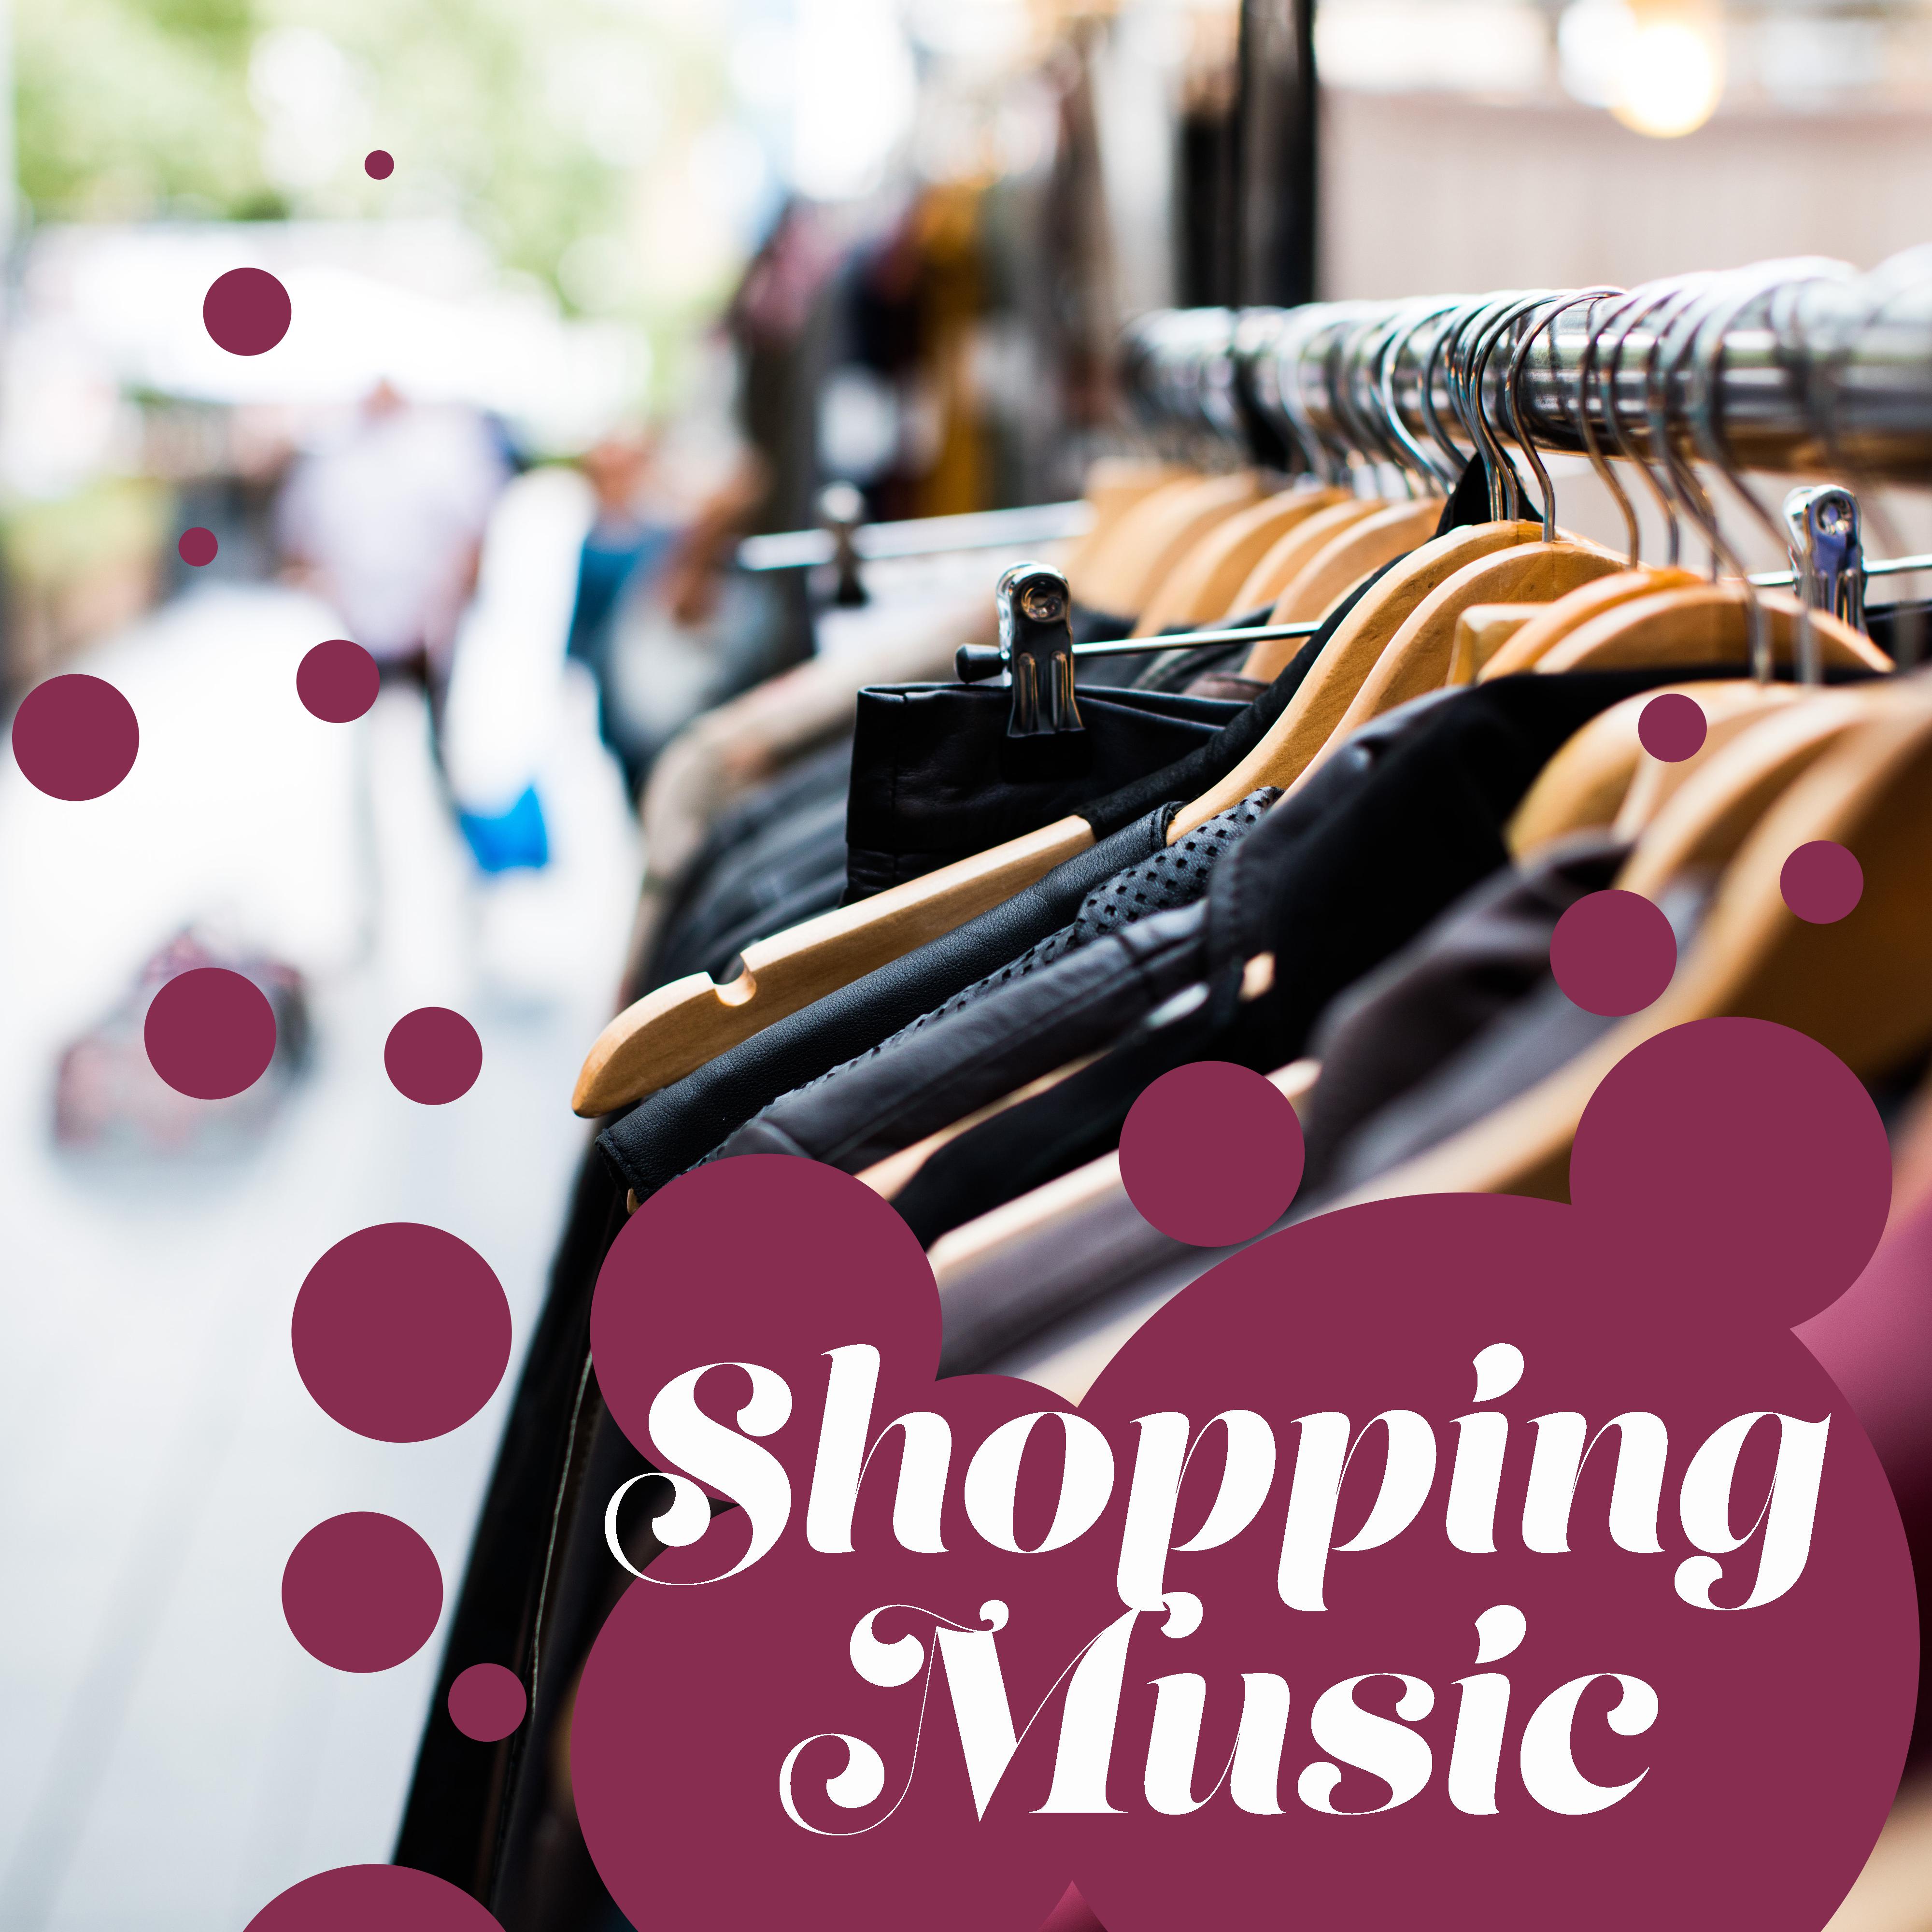 Shopping Music – Instrumental Jazz for Relaxation, Perfect Day, Piano Music, Gentle Guitar, Coffee Shop, Shopping Jazz